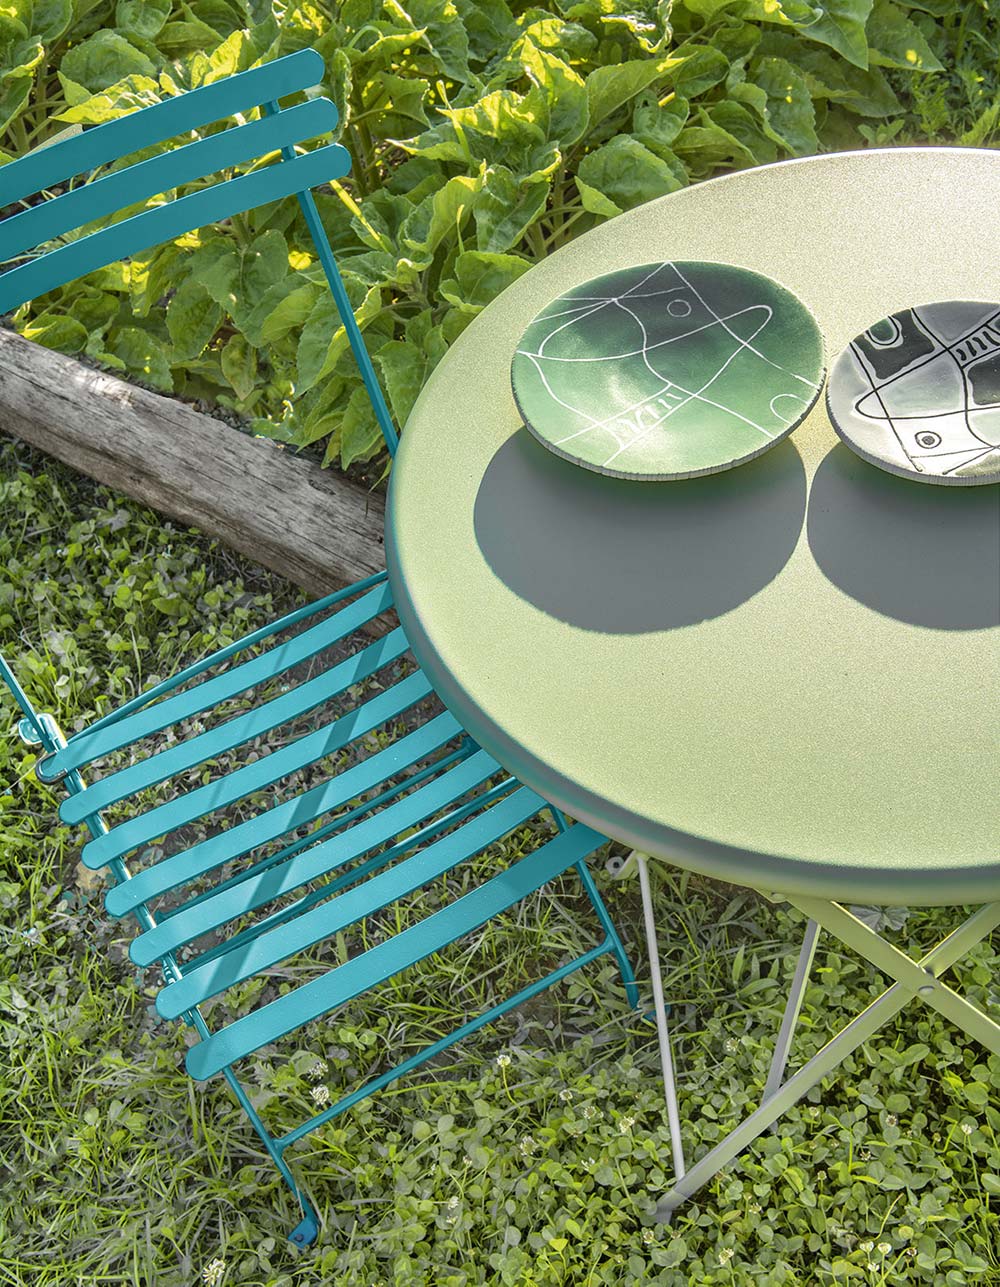 Ethimo colorful metal folding bistro tables and chairs on outdoor patio